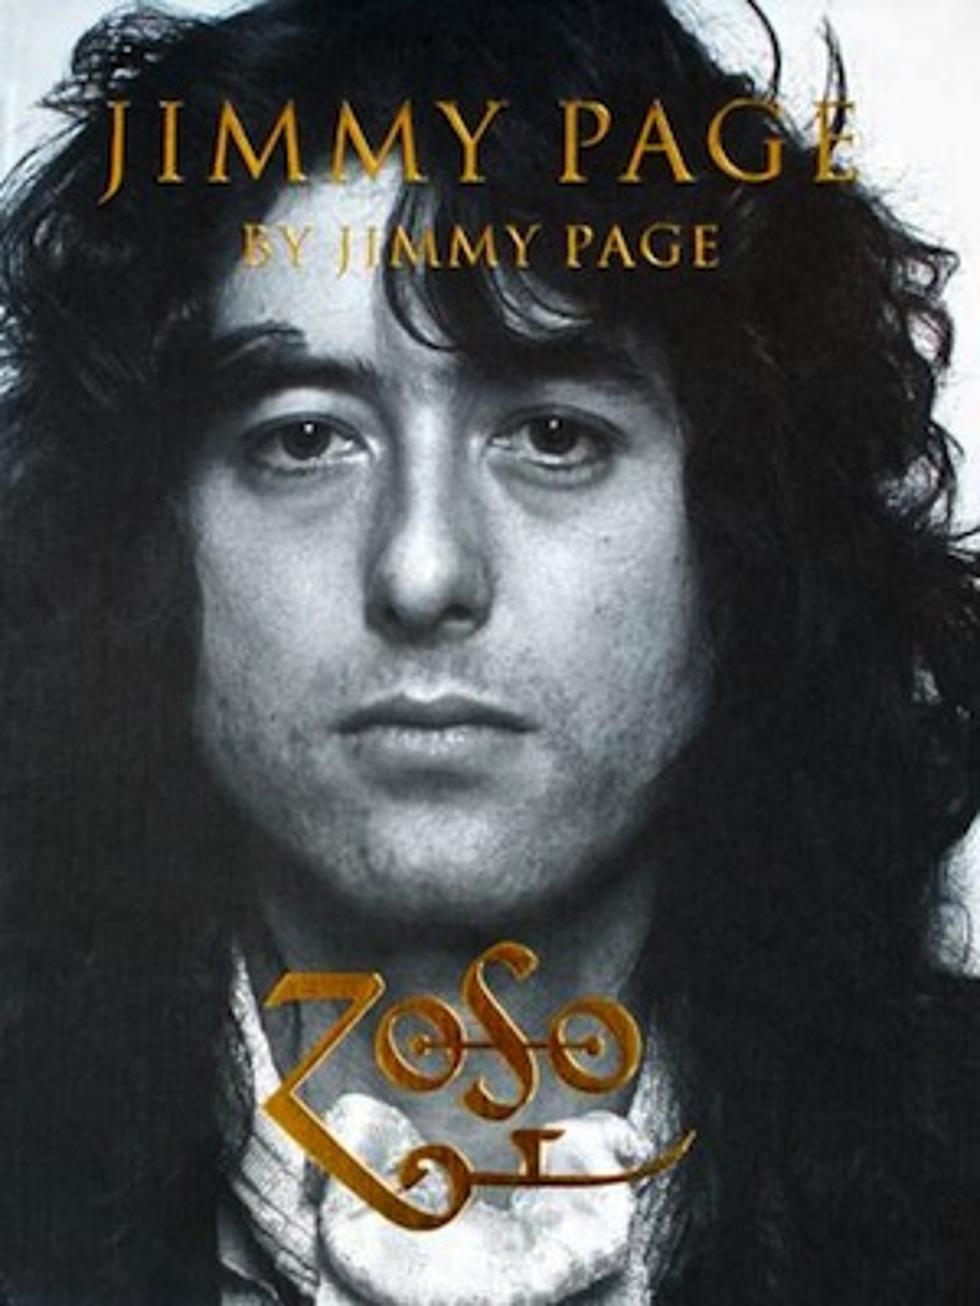 Led Zeppelin&#8217;s Jimmy Page to Discuss New Memoir Live With Soundgarden&#8217;s Chris Cornell